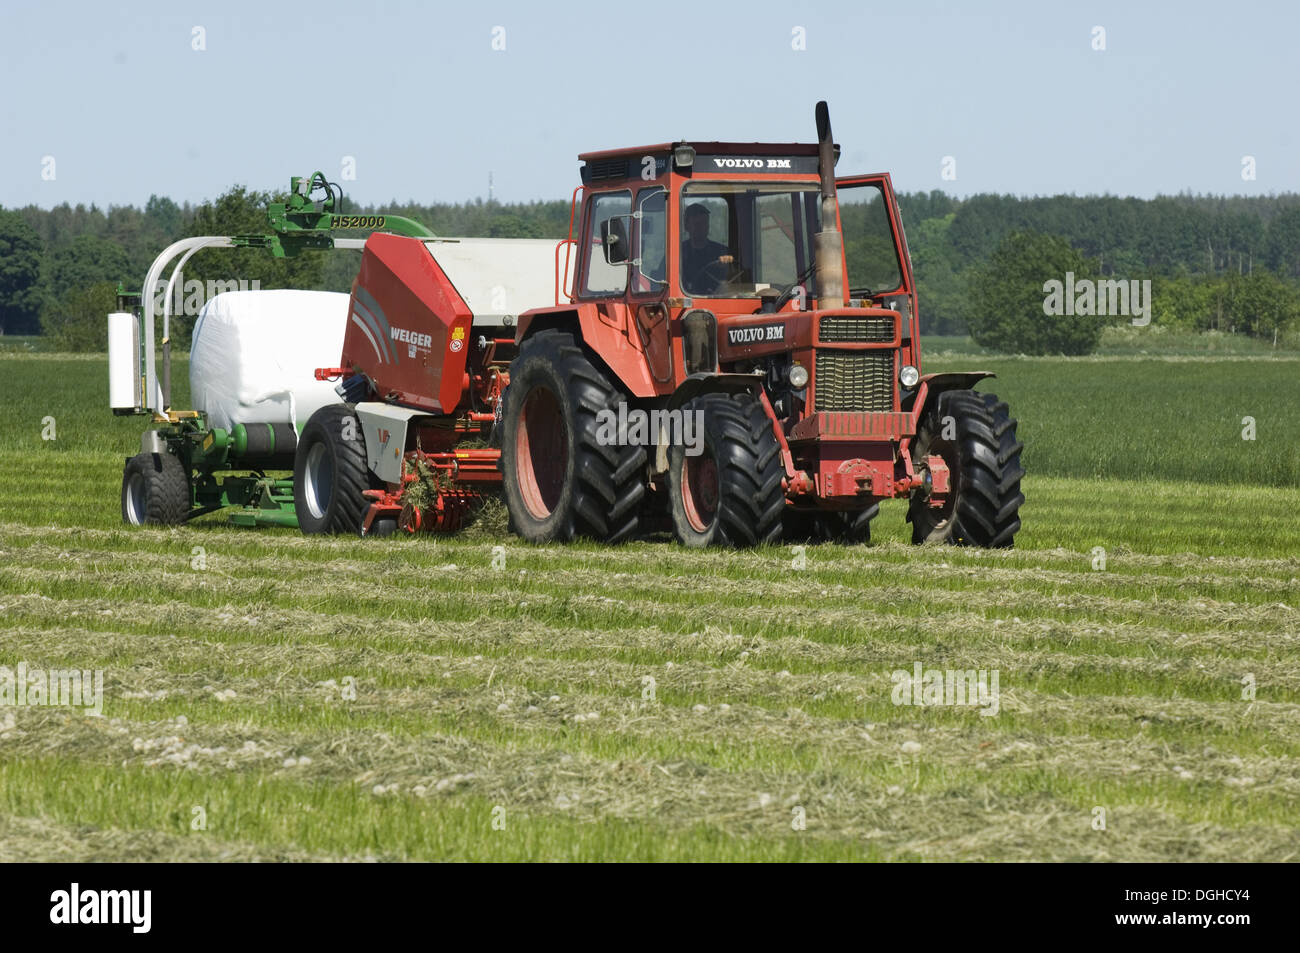 Volvo tractor pulling round baler and mechanical bale-wrapper, plastic wrapping round silage bale, Sweden Stock Photo